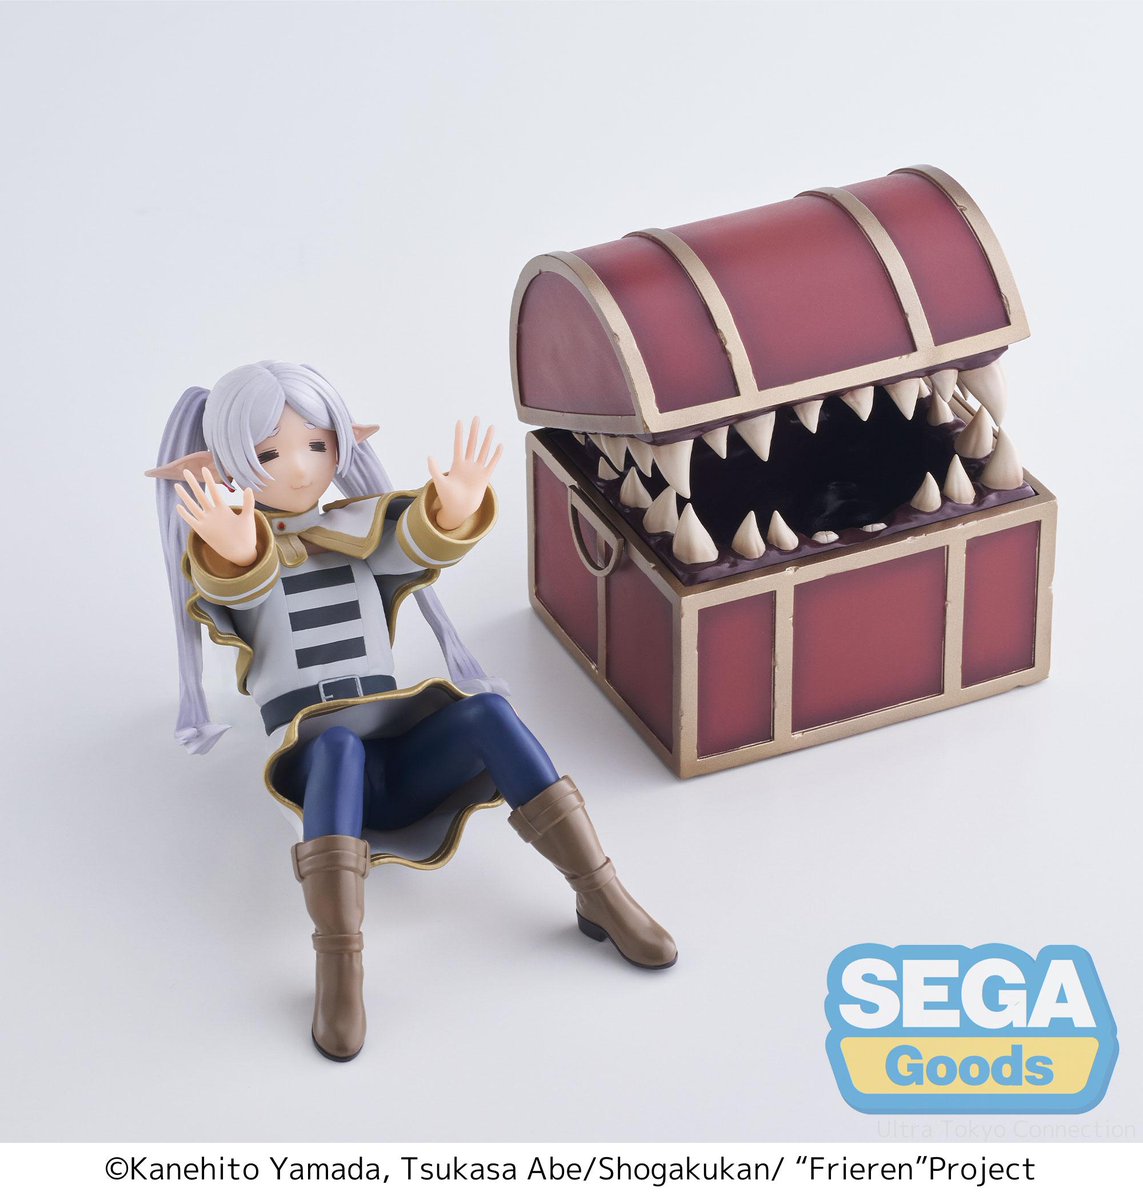 Even the most powerful mages can't resist the temptation of mimics... Luckily, you can help free Frieren from the trap with her newest figure from SEGA! ✨ GET: got.cr/frierenmimicfi…